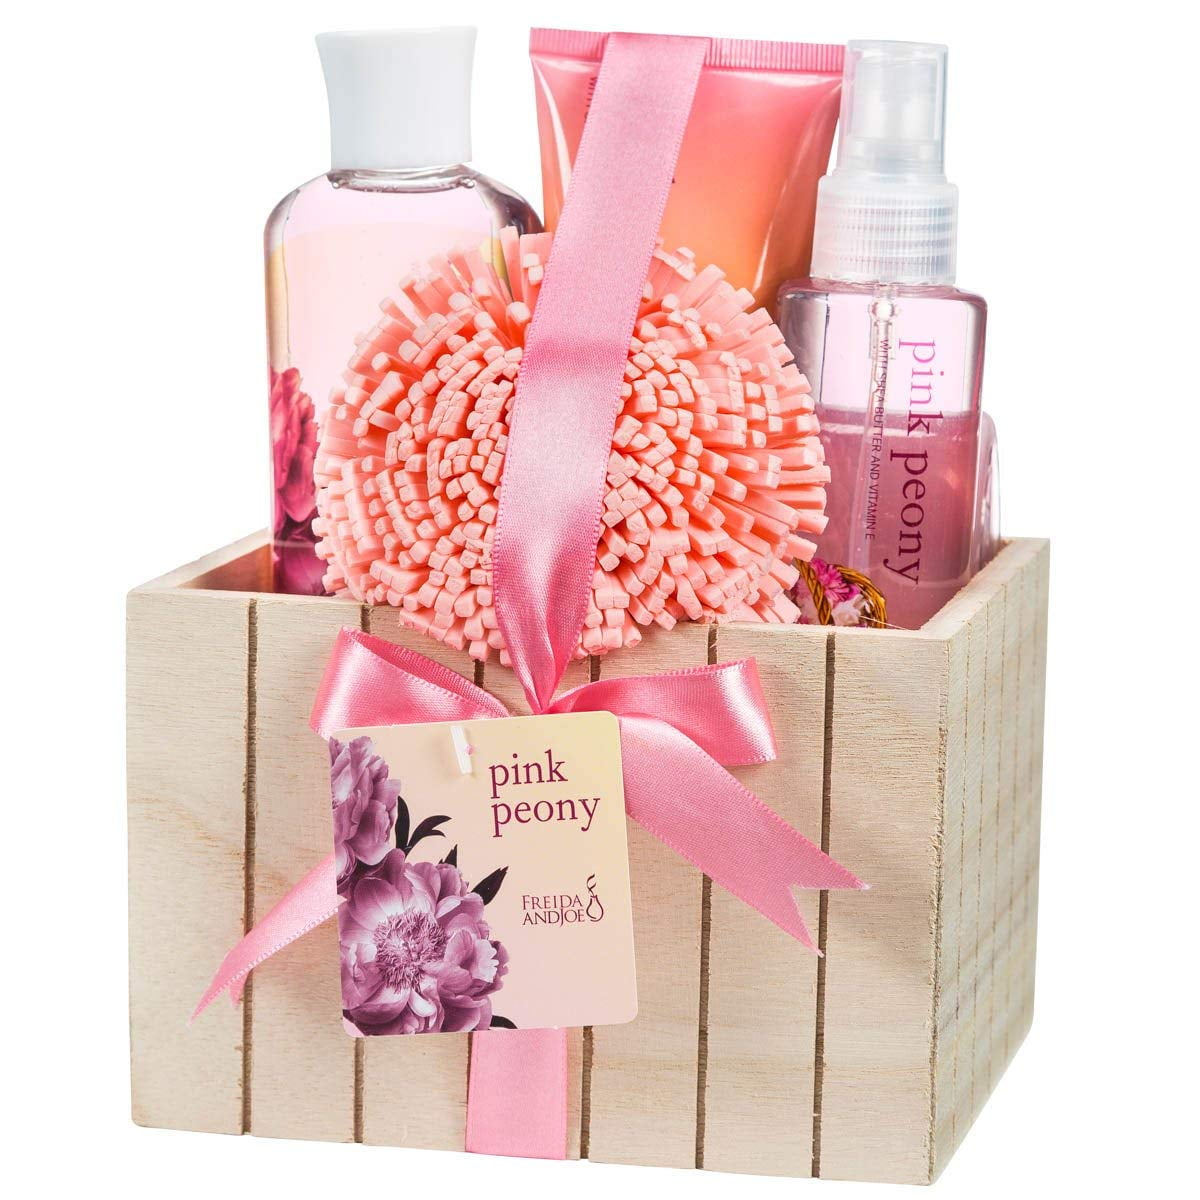 Freida & Joe Pink Peony Spa Bath and Body Gift Set for Women Luxury Body Care Mothers Day Gifts for Mom - image 1 of 6